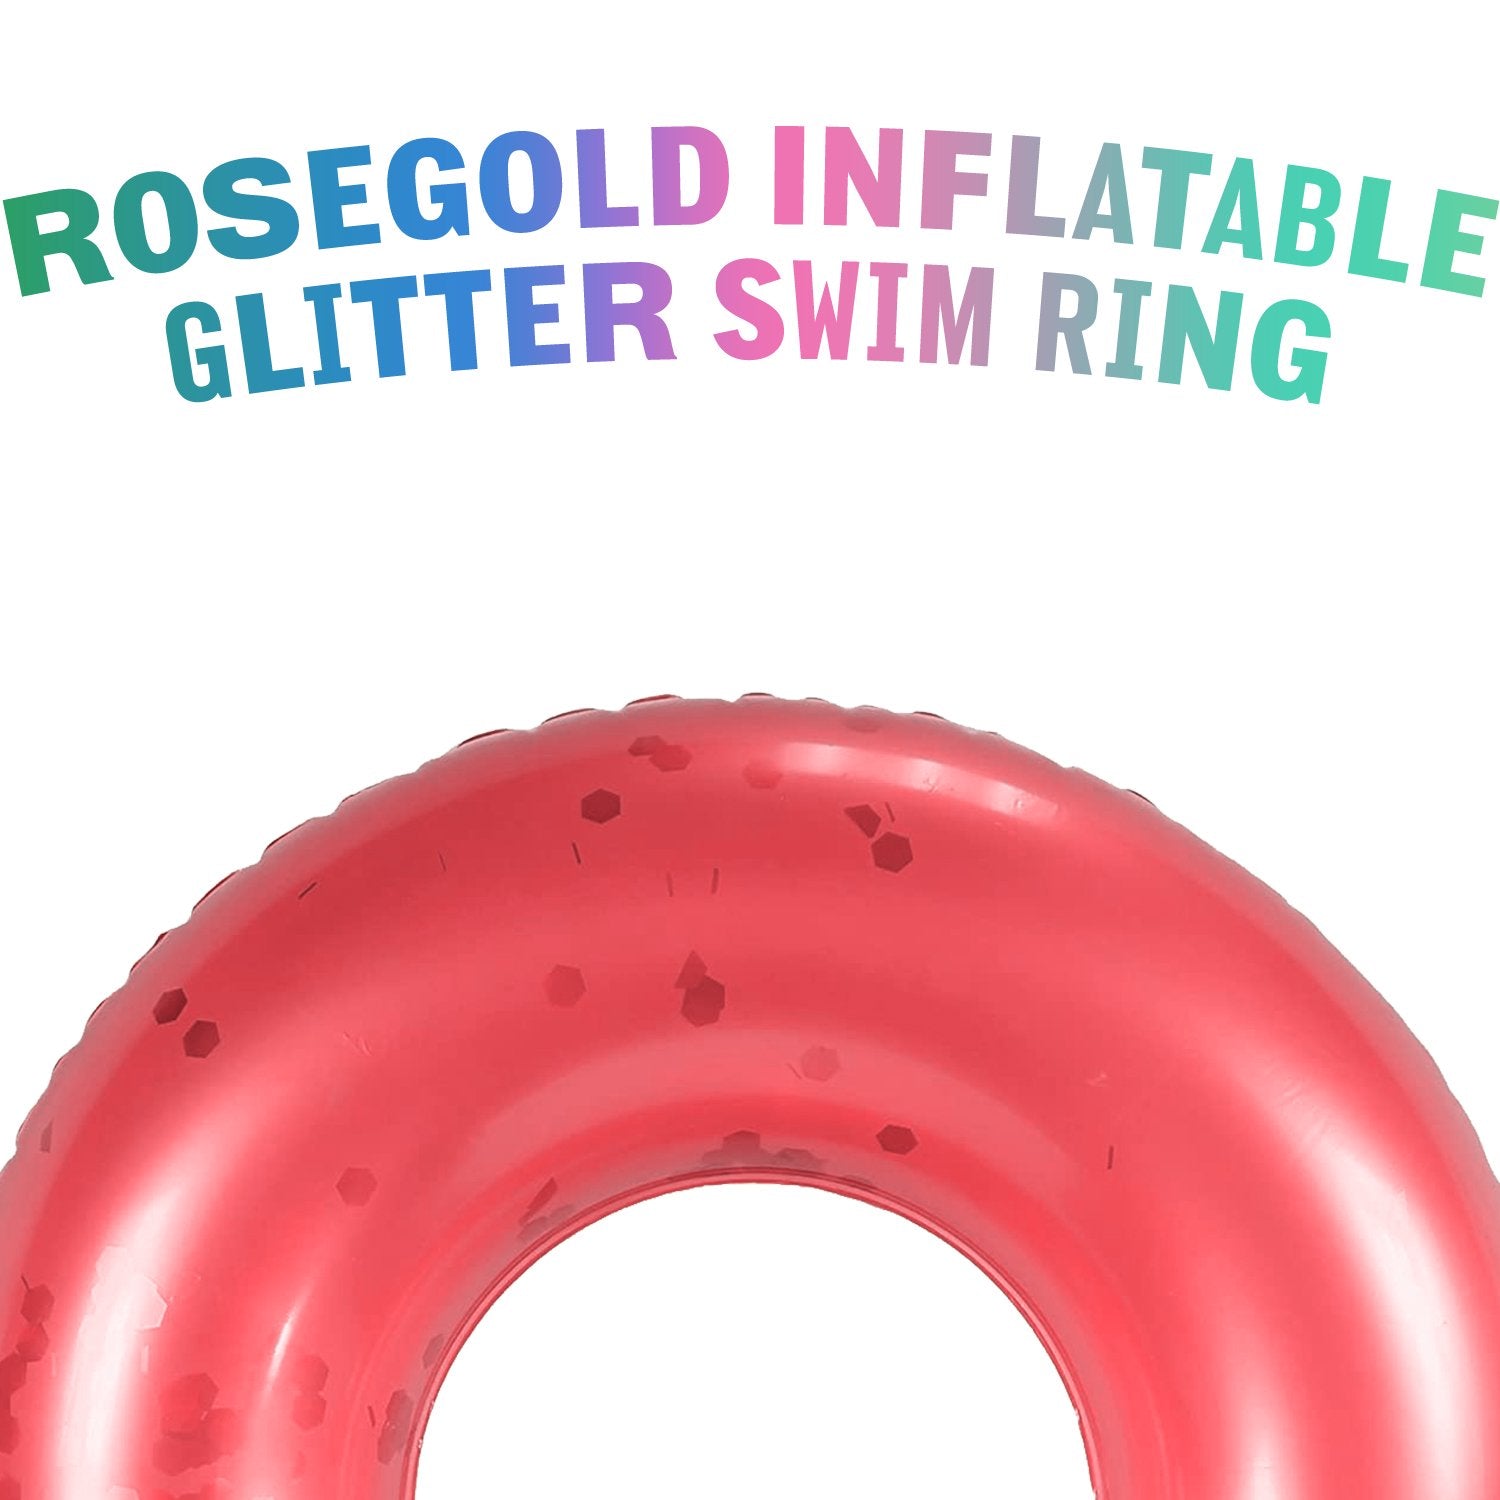 Pool Float Inflatable Floaties Glitter Sequin Pool Tube Swim Rings Pool Toys Summer Beach Toys for Adults Teenagers Girls Kids&nbsp;